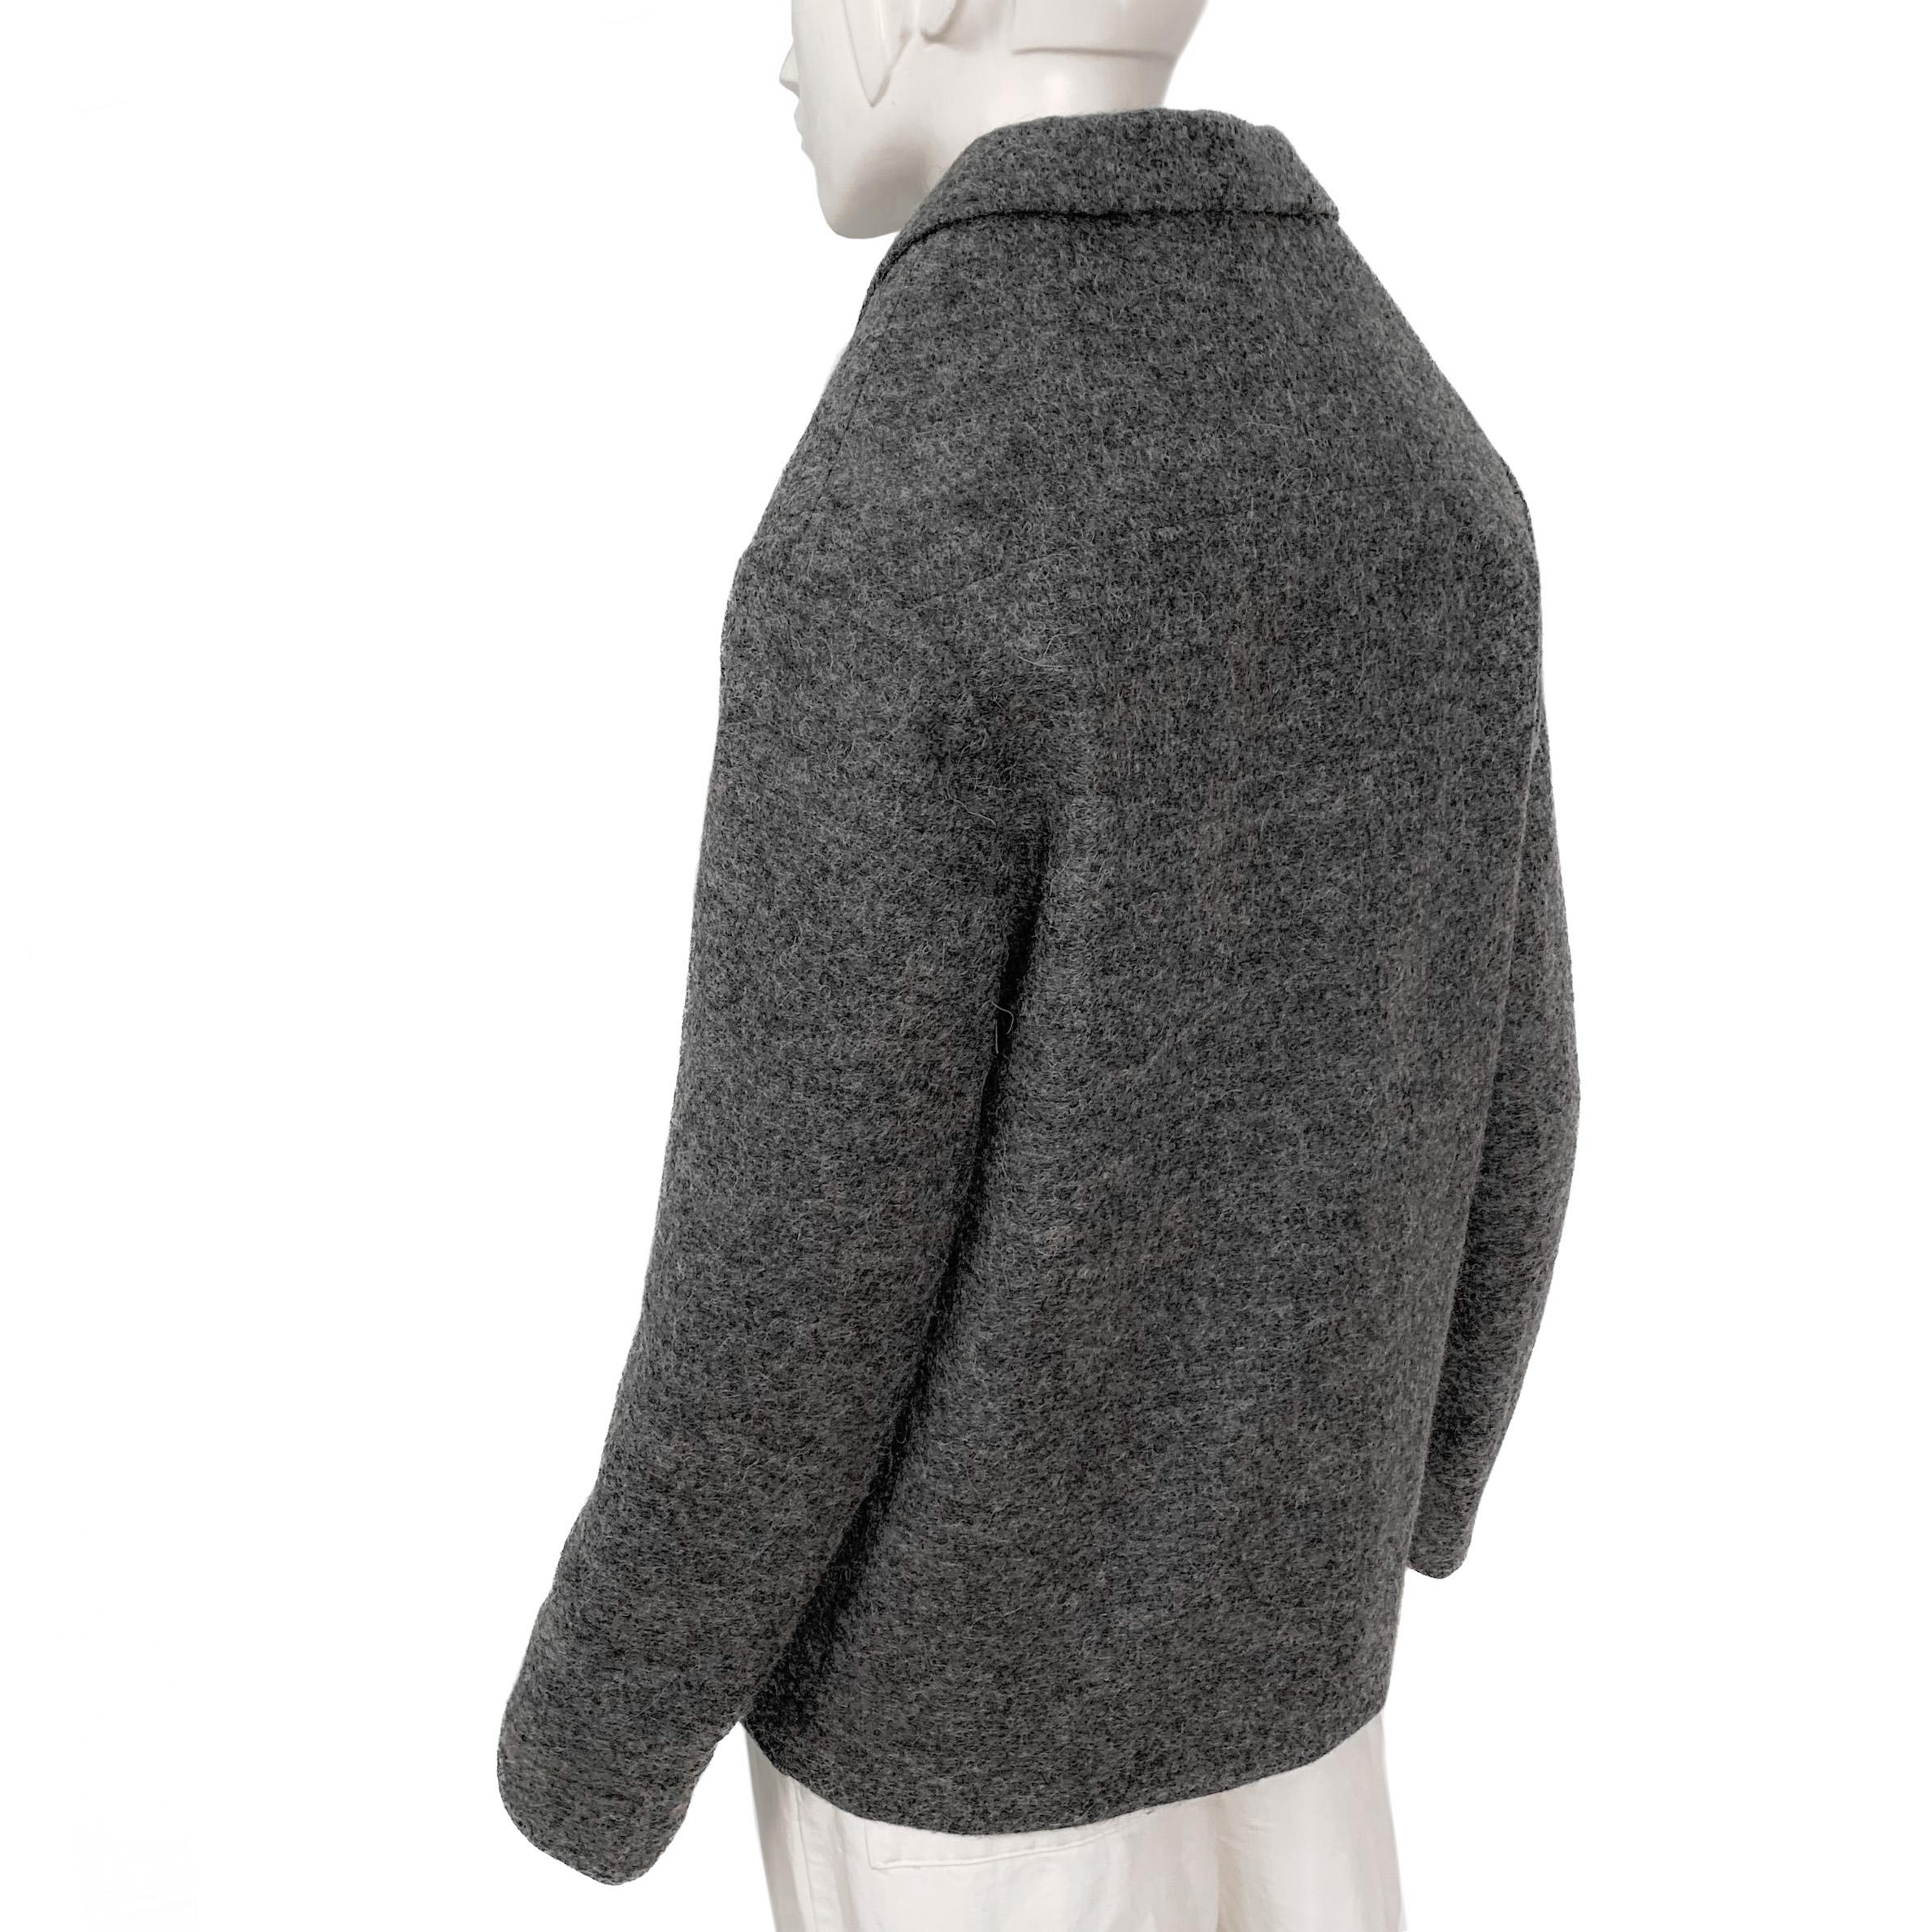 AW 2010 mr. Margiela's last RTW collection grey wool deconstructed blazer For Sale 3